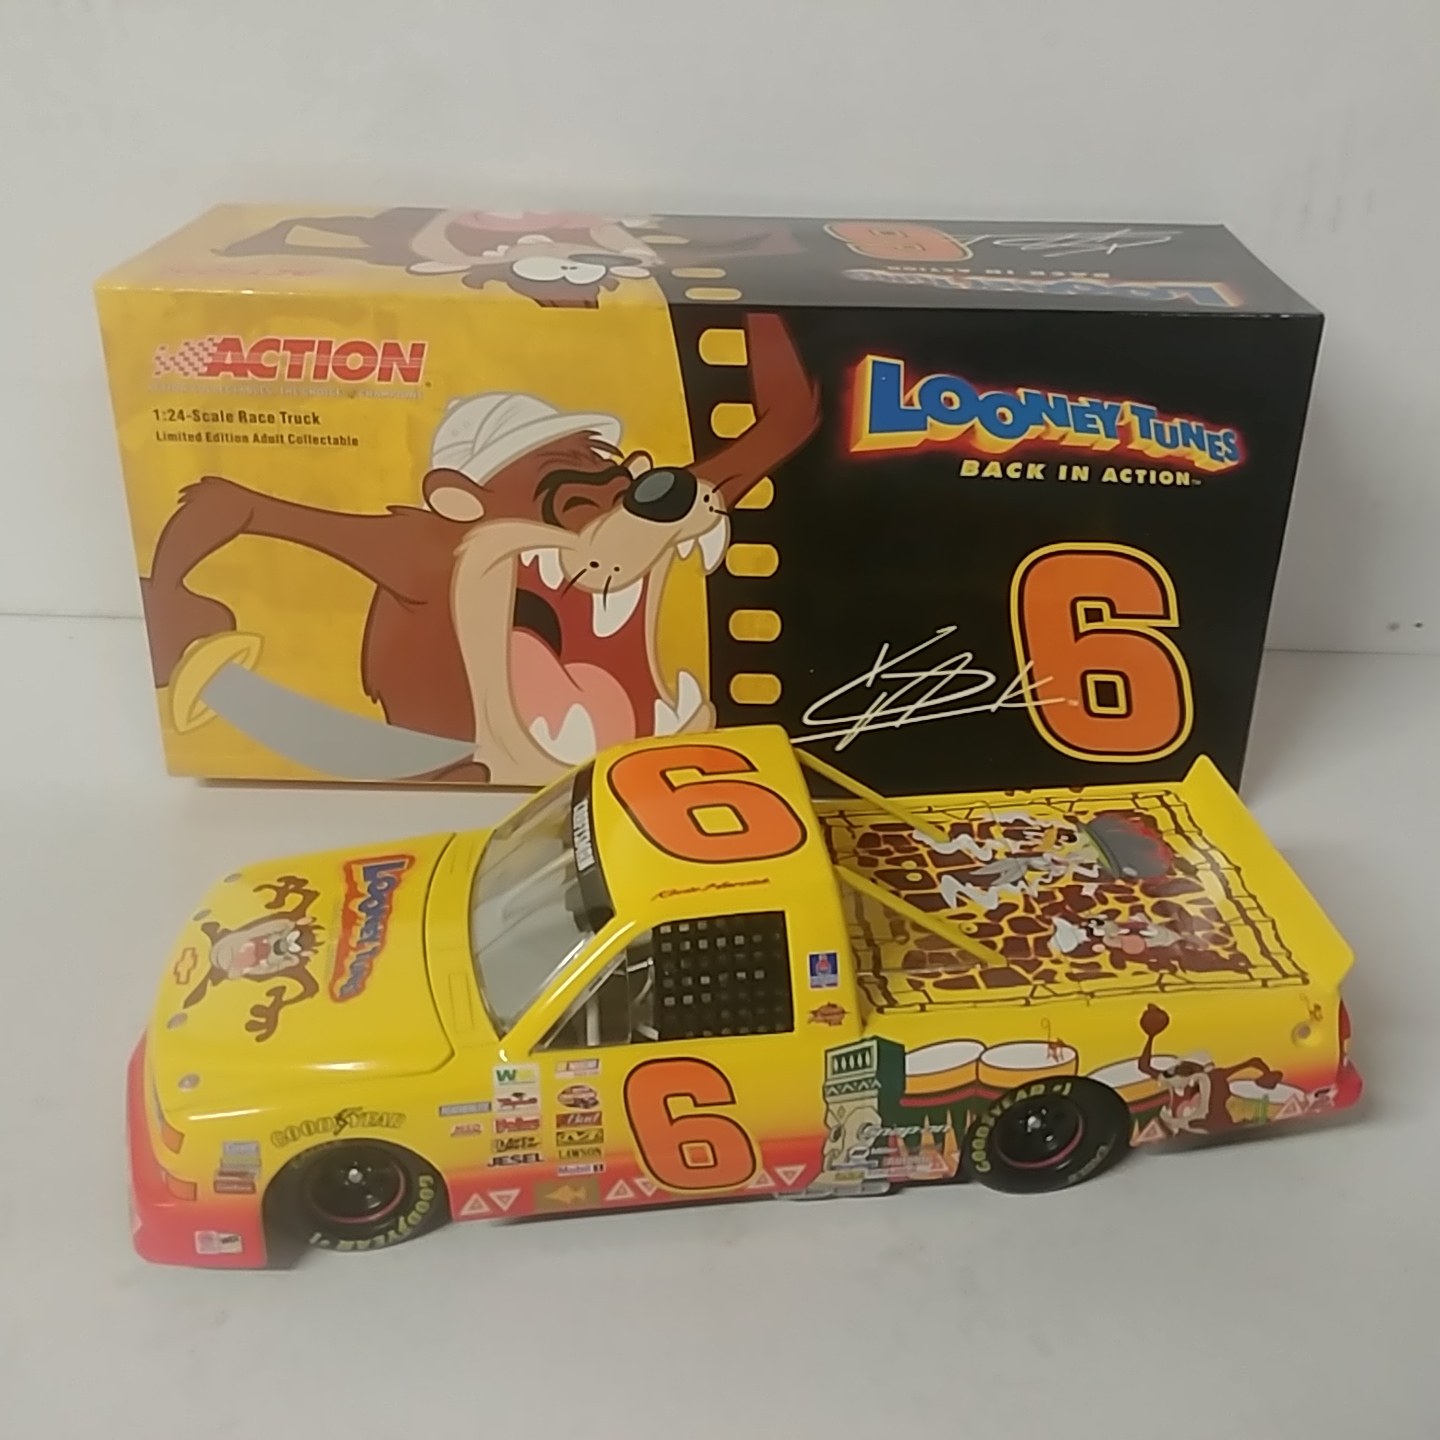 2003 Kevin Harvick 1/24th Looney Tunes truck